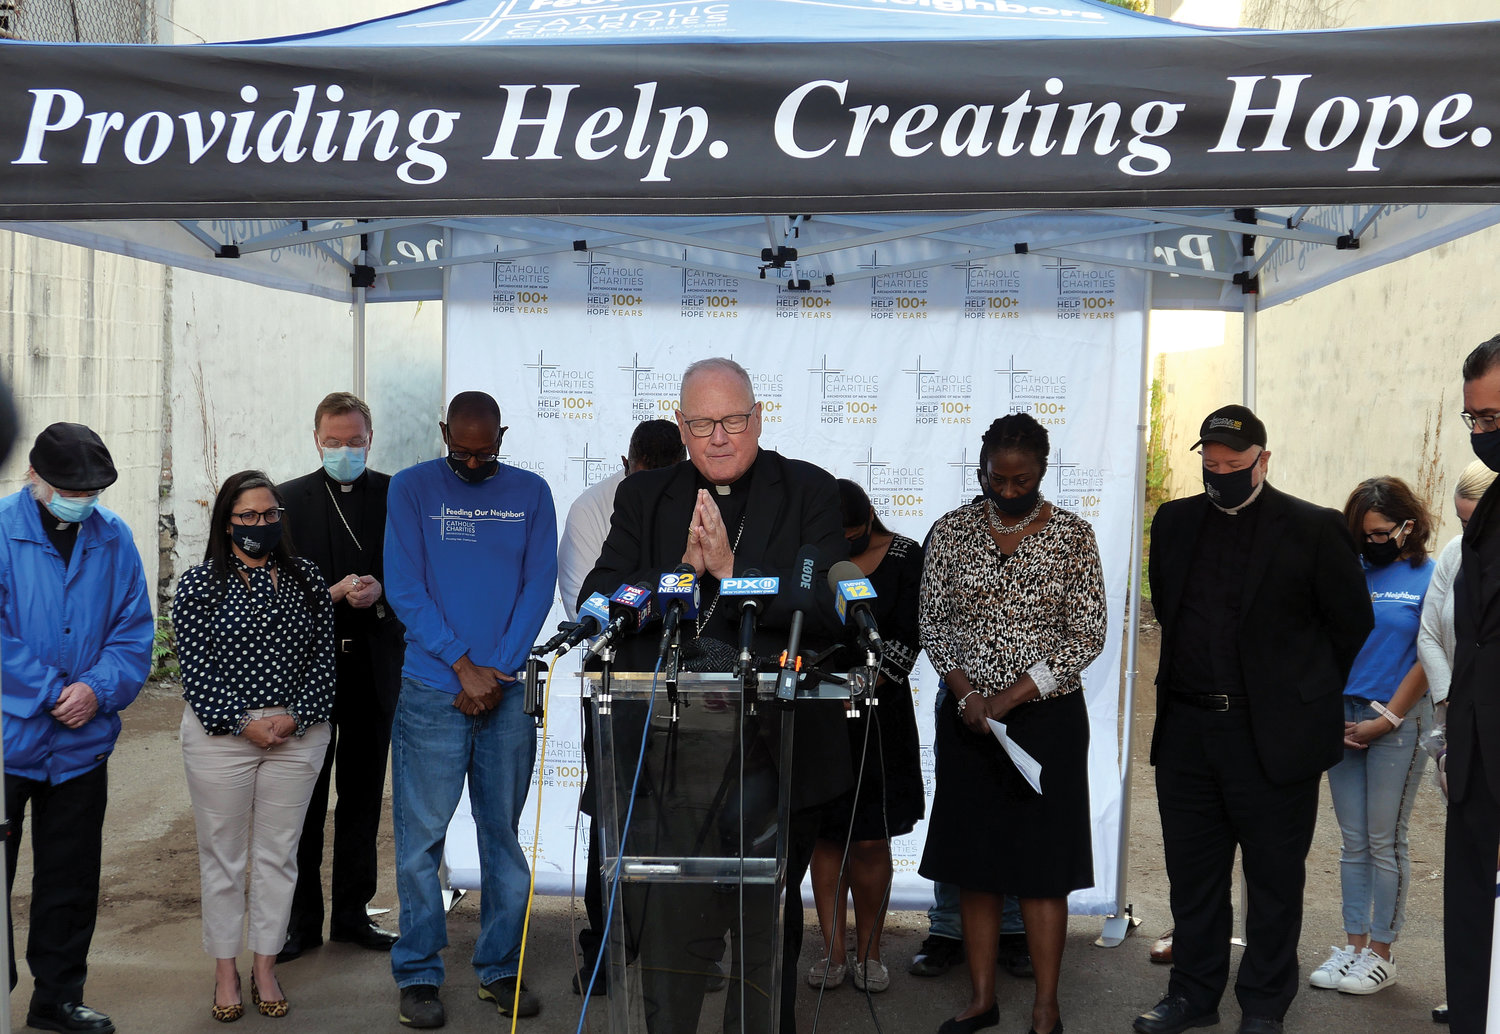 Cardinal Dolan offers a blessing at the start of a Sept. 23 Catholic Charities food distribution gathering at a Catholic Charities site on East 152nd Street in the Bronx. Among the speakers was Msgr. Kevin Sullivan, executive director of archdiocesan Catholic Charities, seen at right with cap.